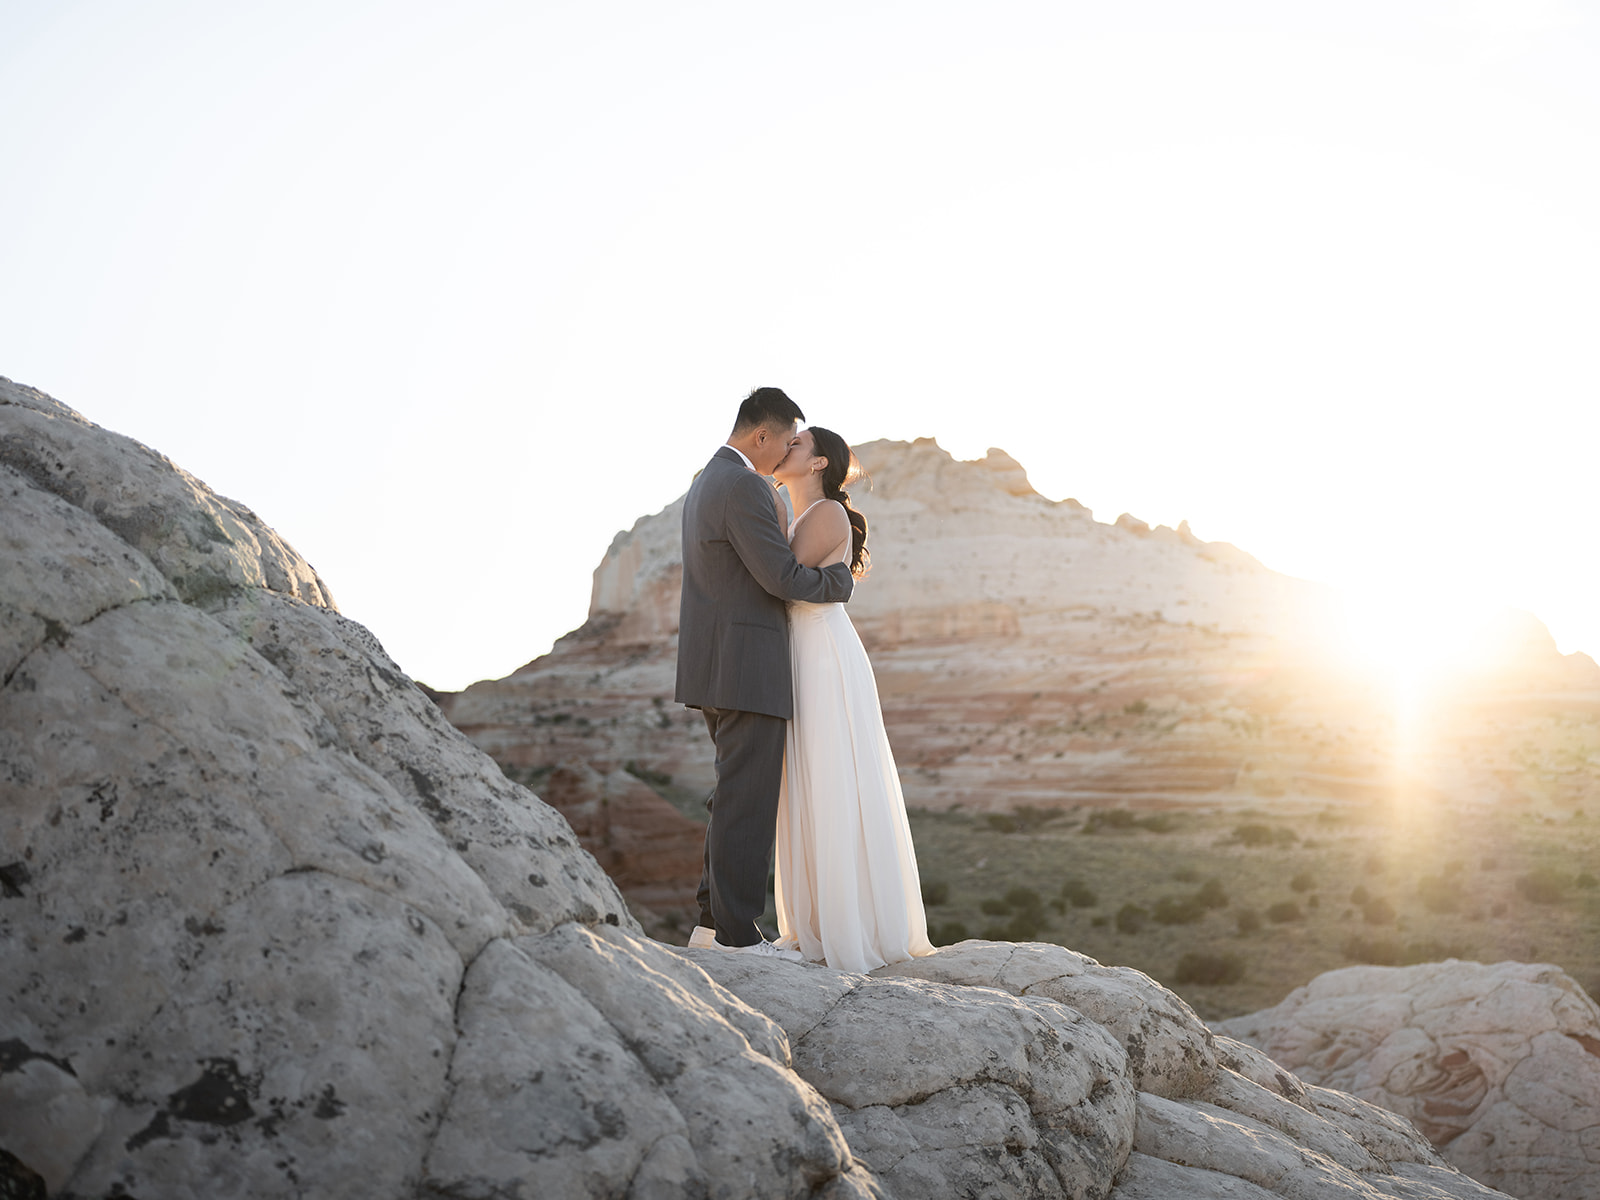 Eloping in the breathtaking and beautiful landscape of White Pocket, Arizona